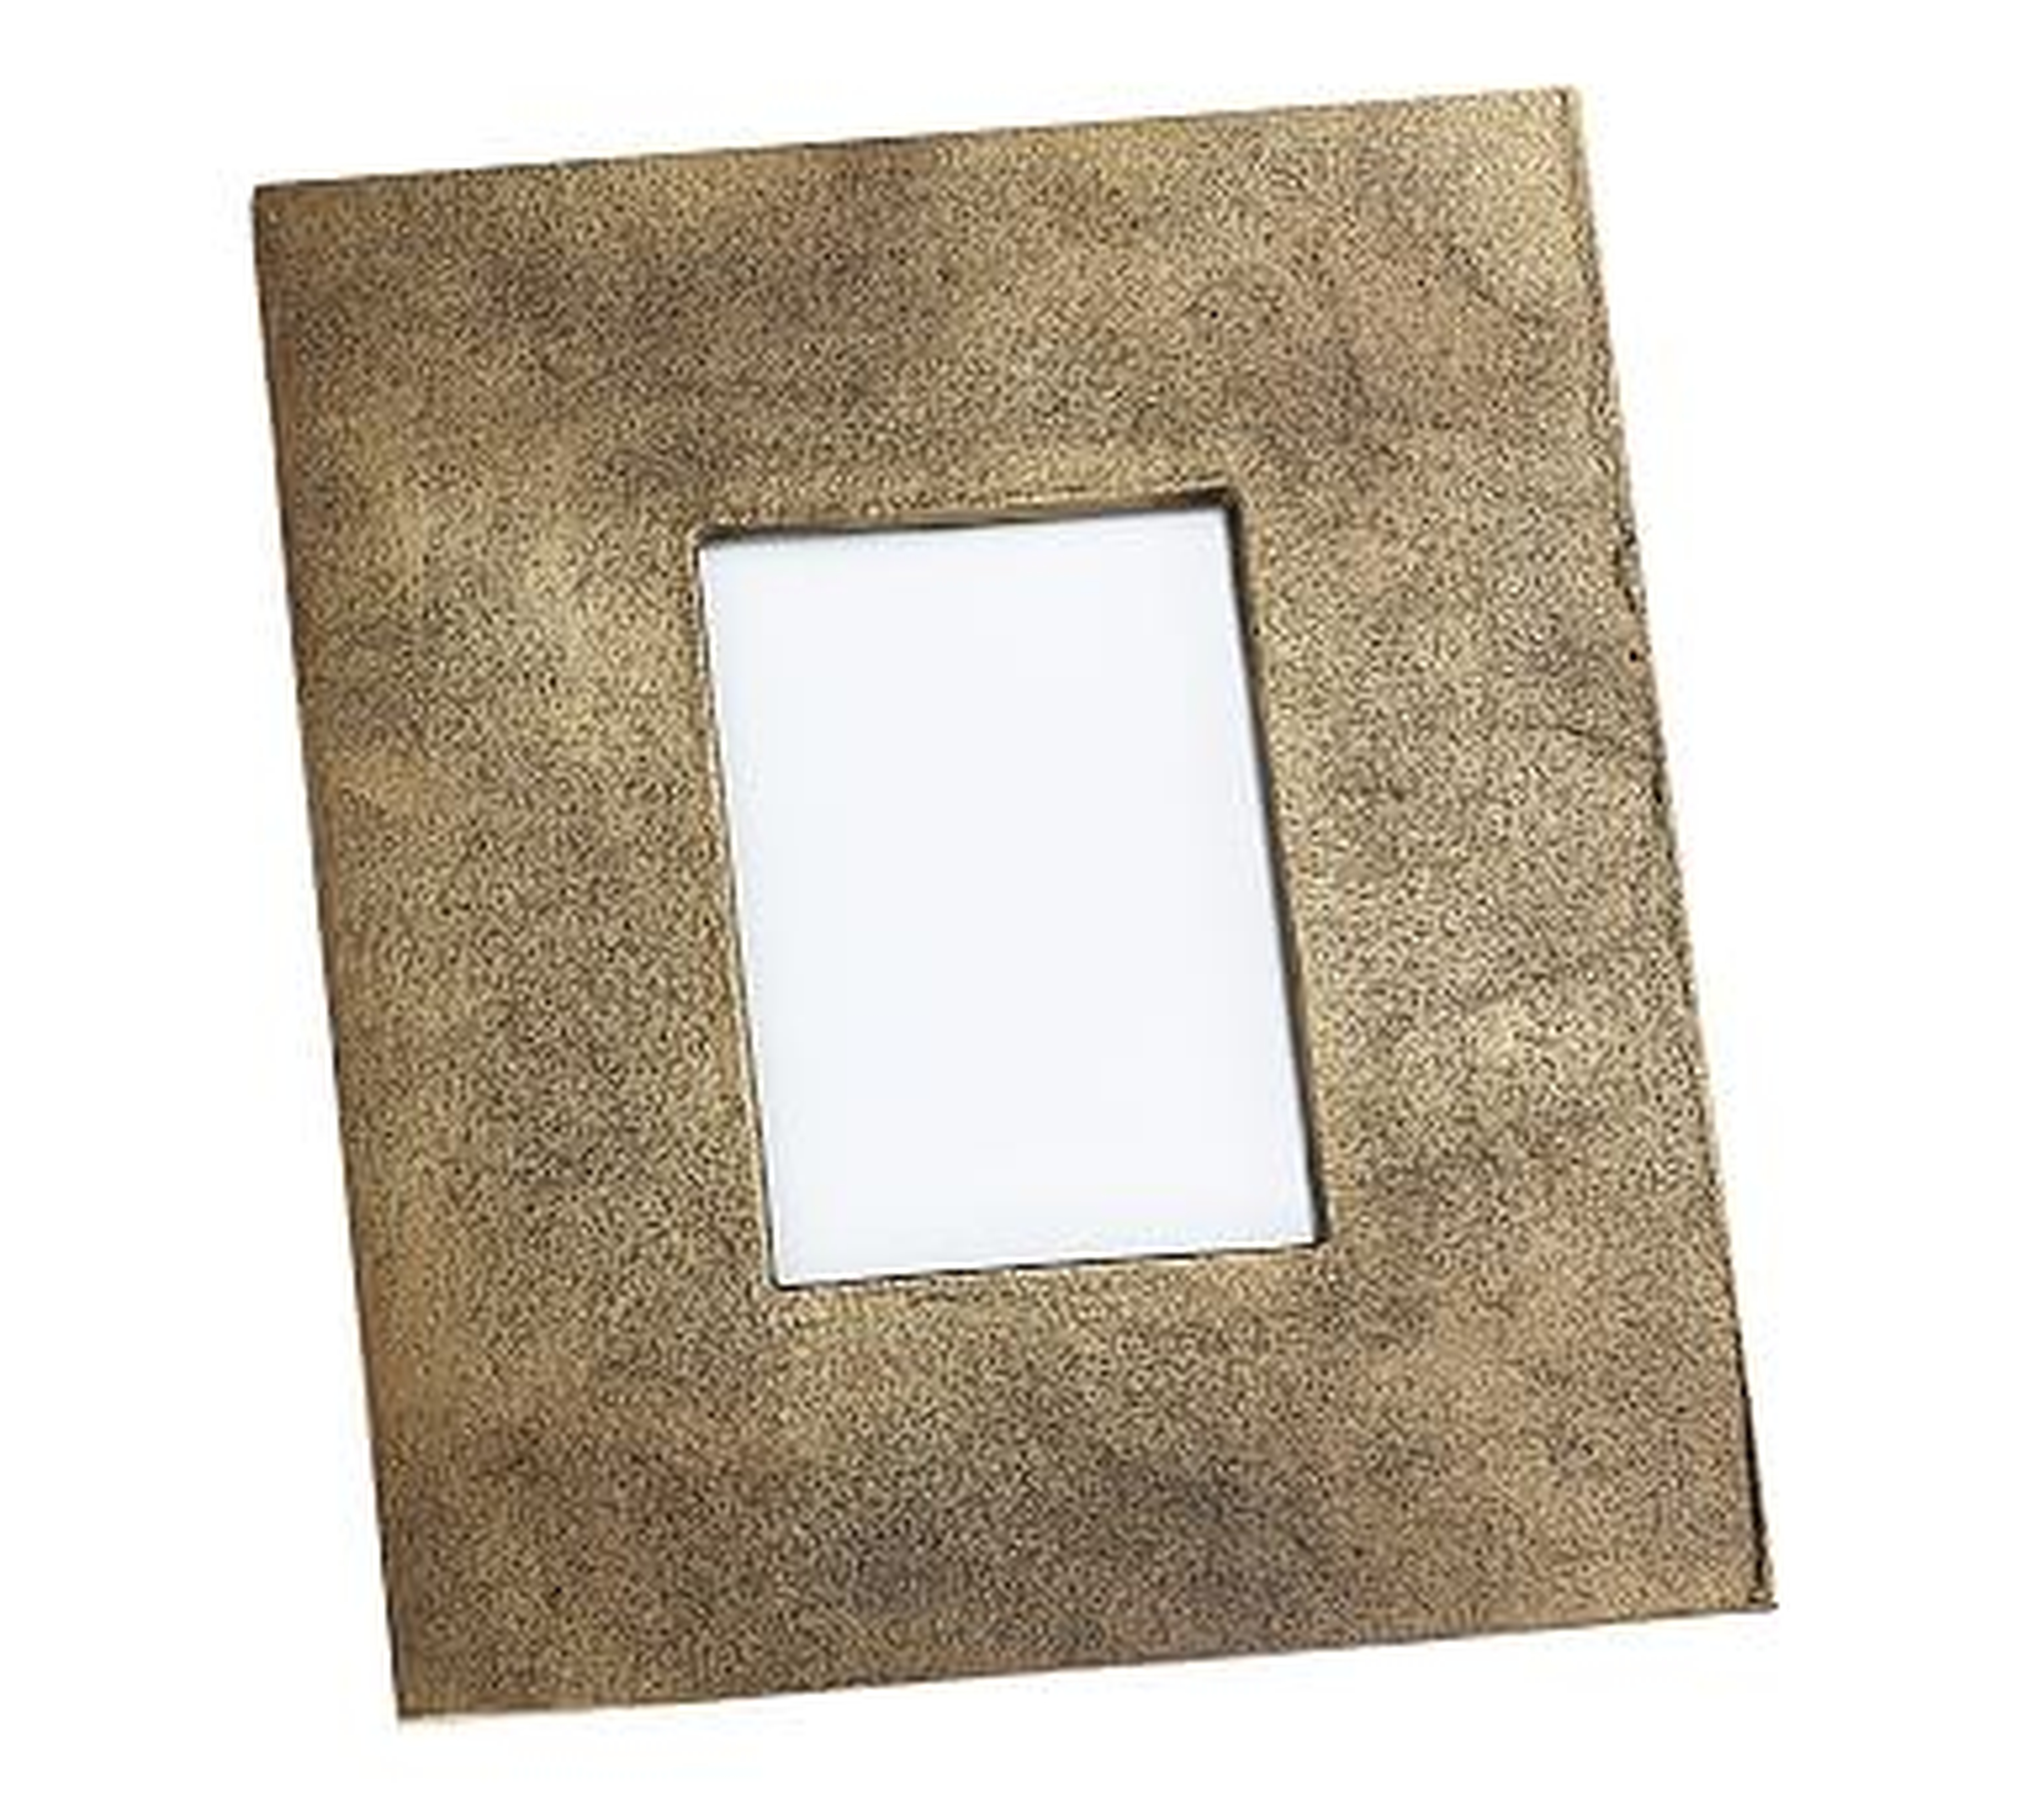 Rena Brass Picture Frame, 5" x 7" (11" x 13" overall) - Pottery Barn